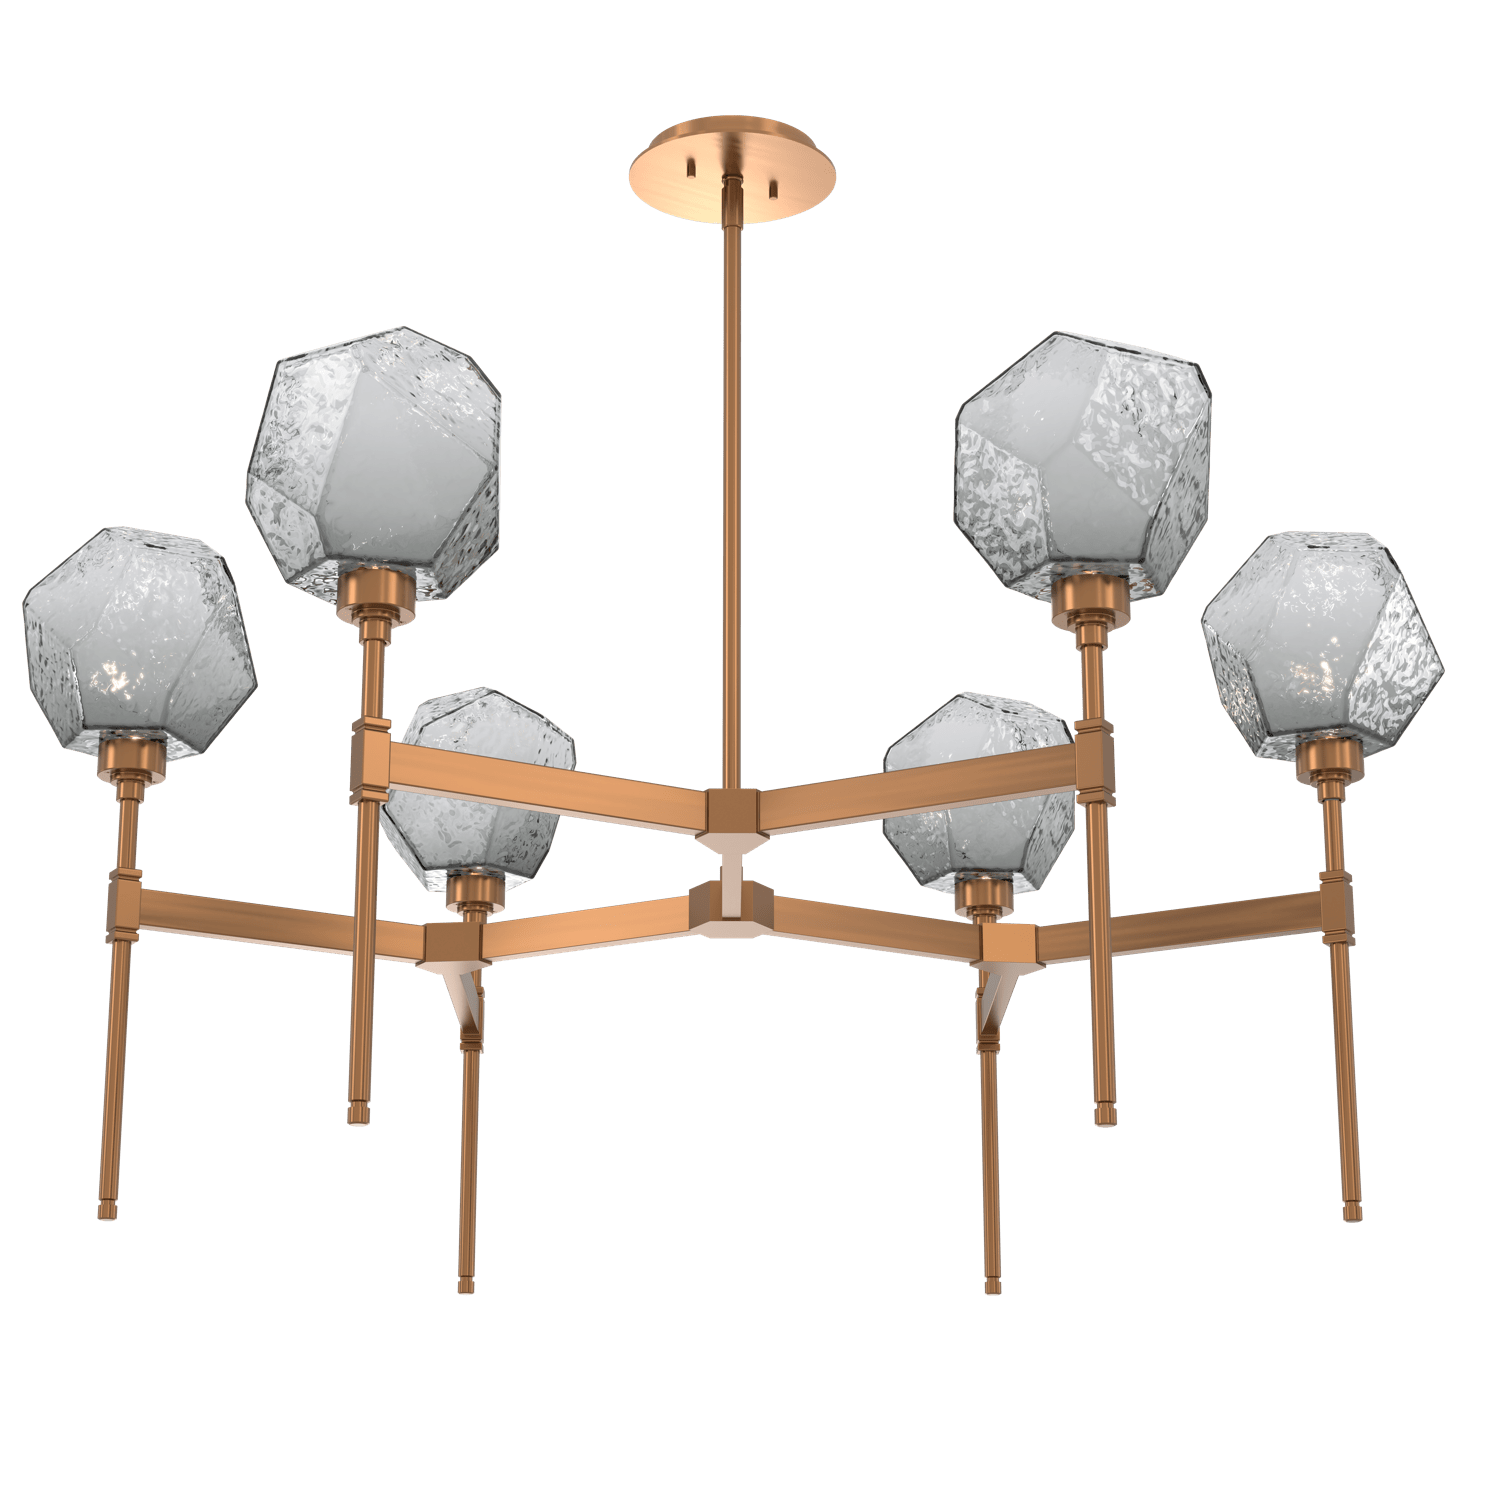 CHB0039-39-RB-S-Hammerton-Studio-Gem-round-belvedere-chandelier-with-oil-rubbed-bronze-finish-and-smoke-blown-glass-shades-and-LED-lamping